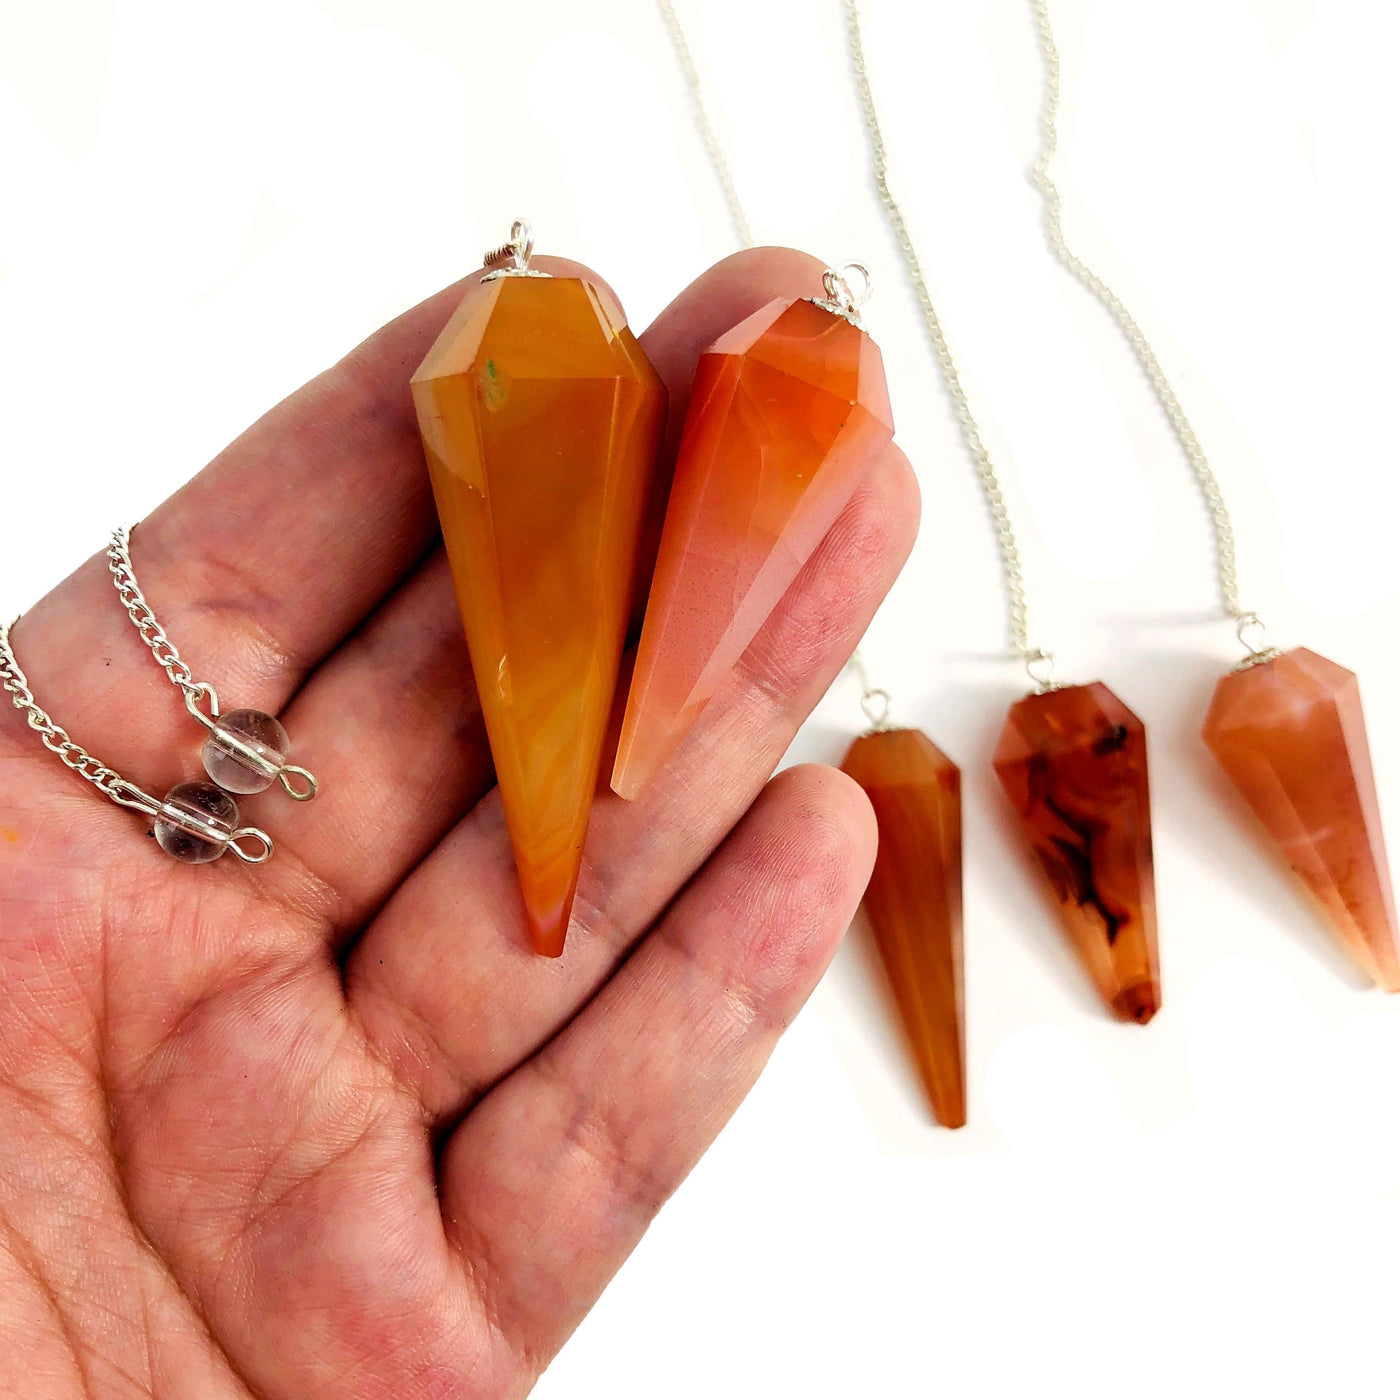 2 carnelian pendulums in hand with 3 others in the background with a white backdrop